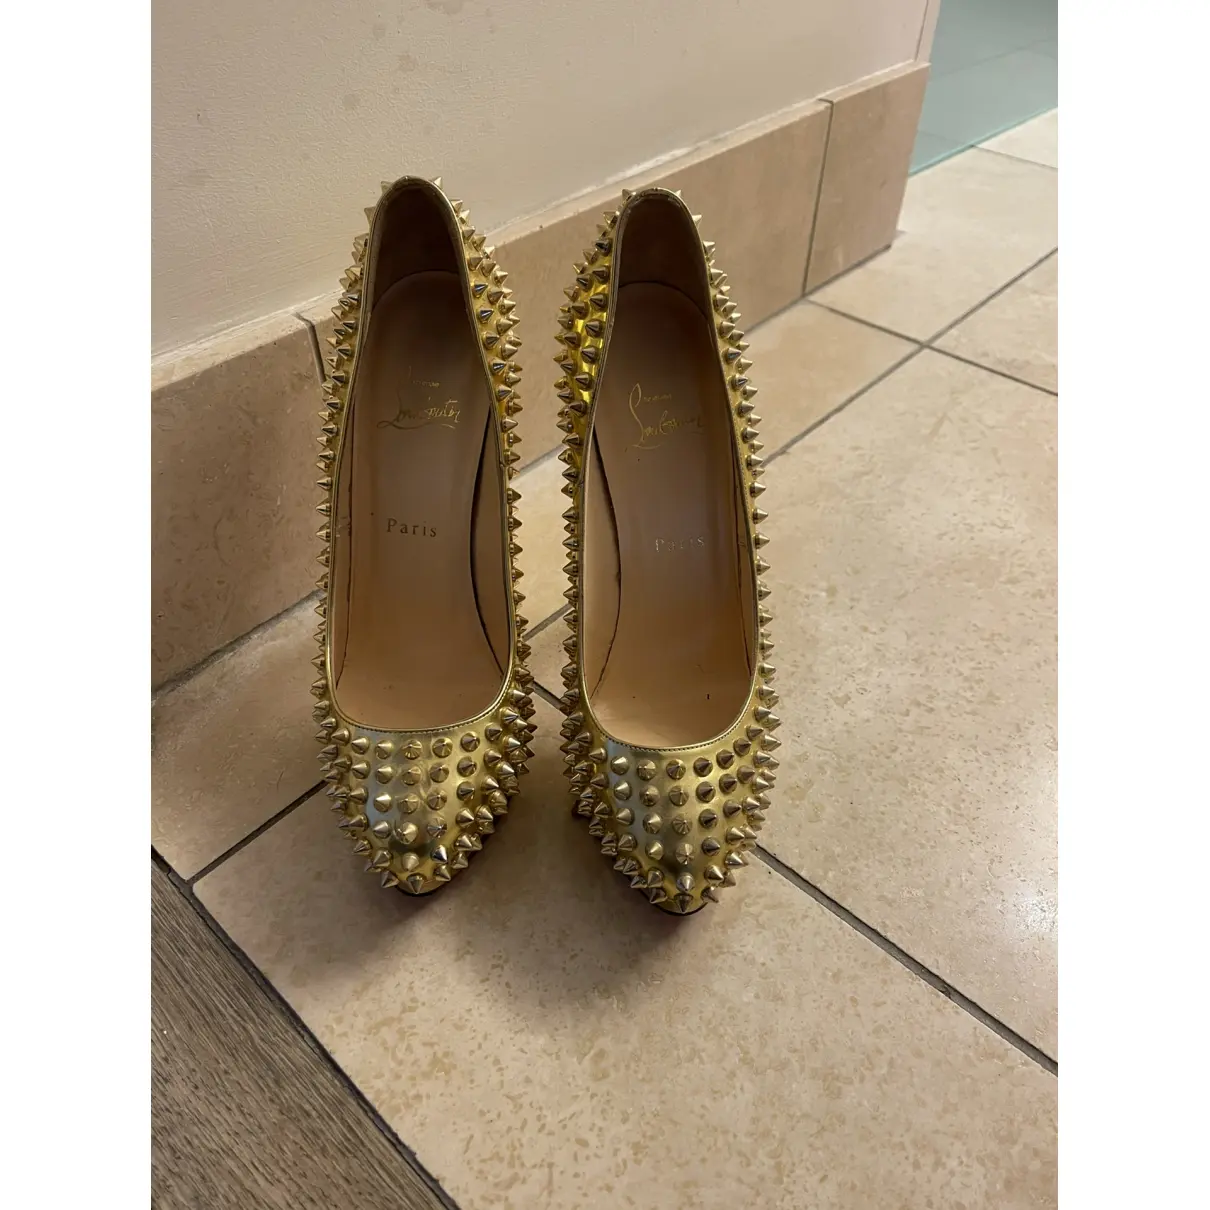 Buy Christian Louboutin Nosy Spikes leather heels online